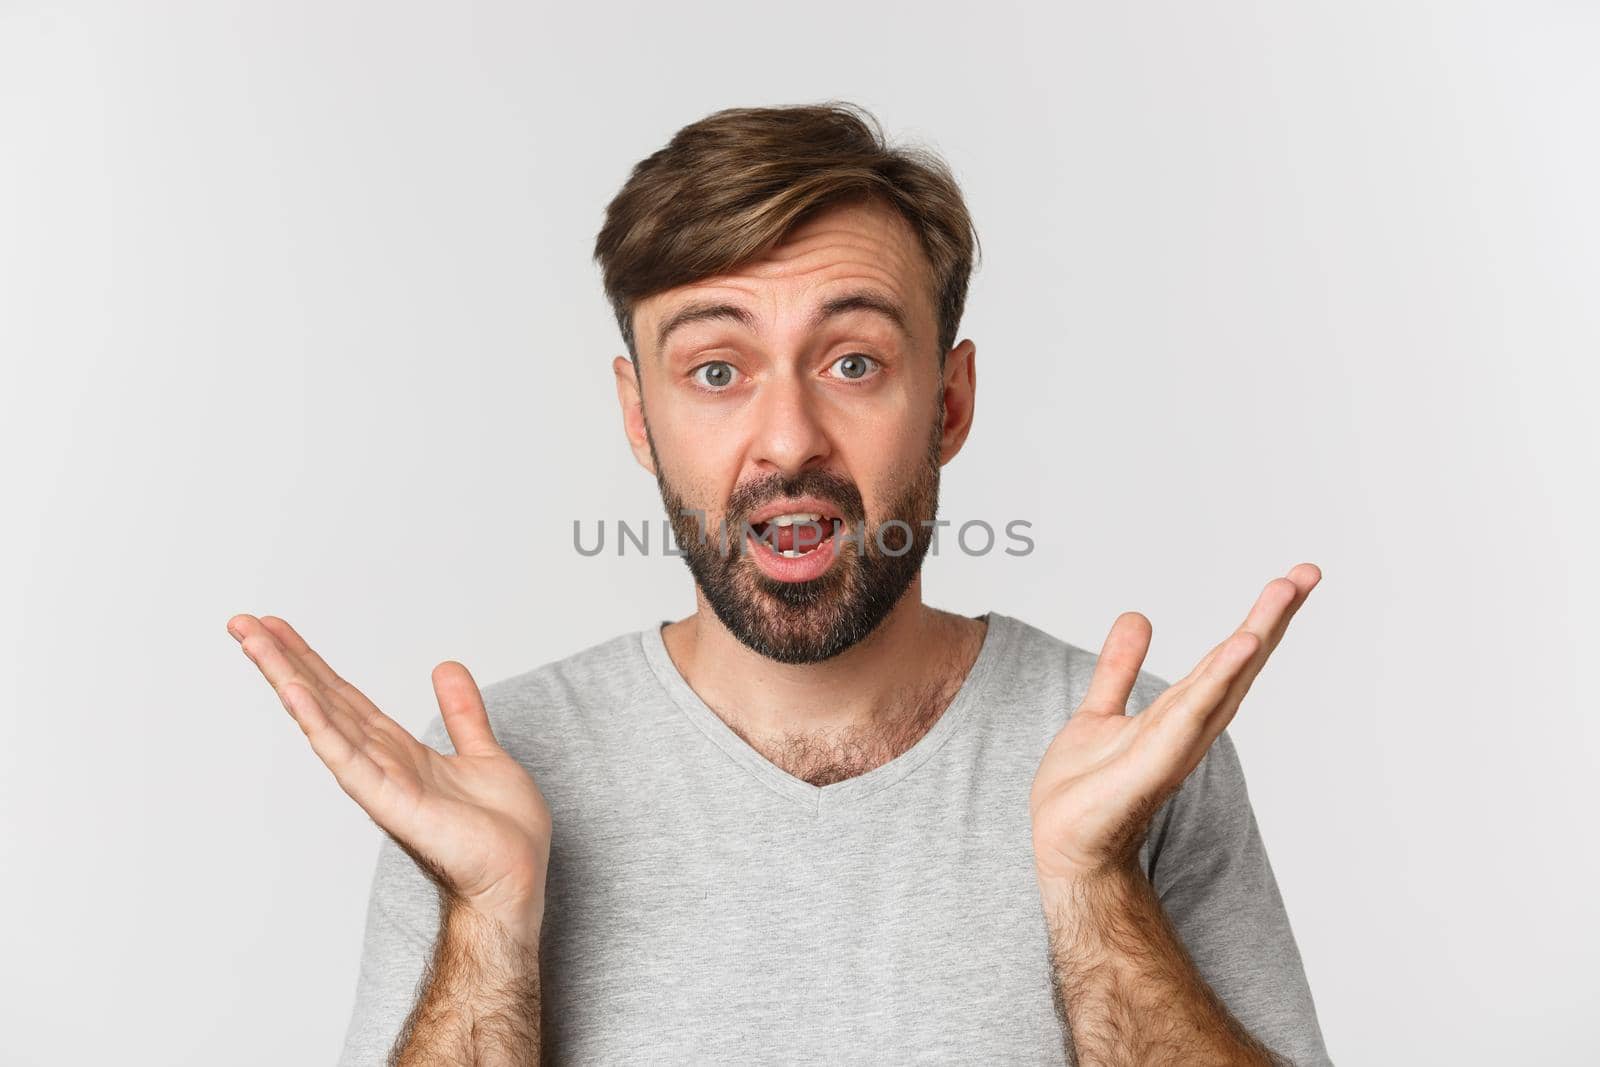 Close-up of surprised handsome man with beard, spread hands sideways and look in awe, standing over white background.